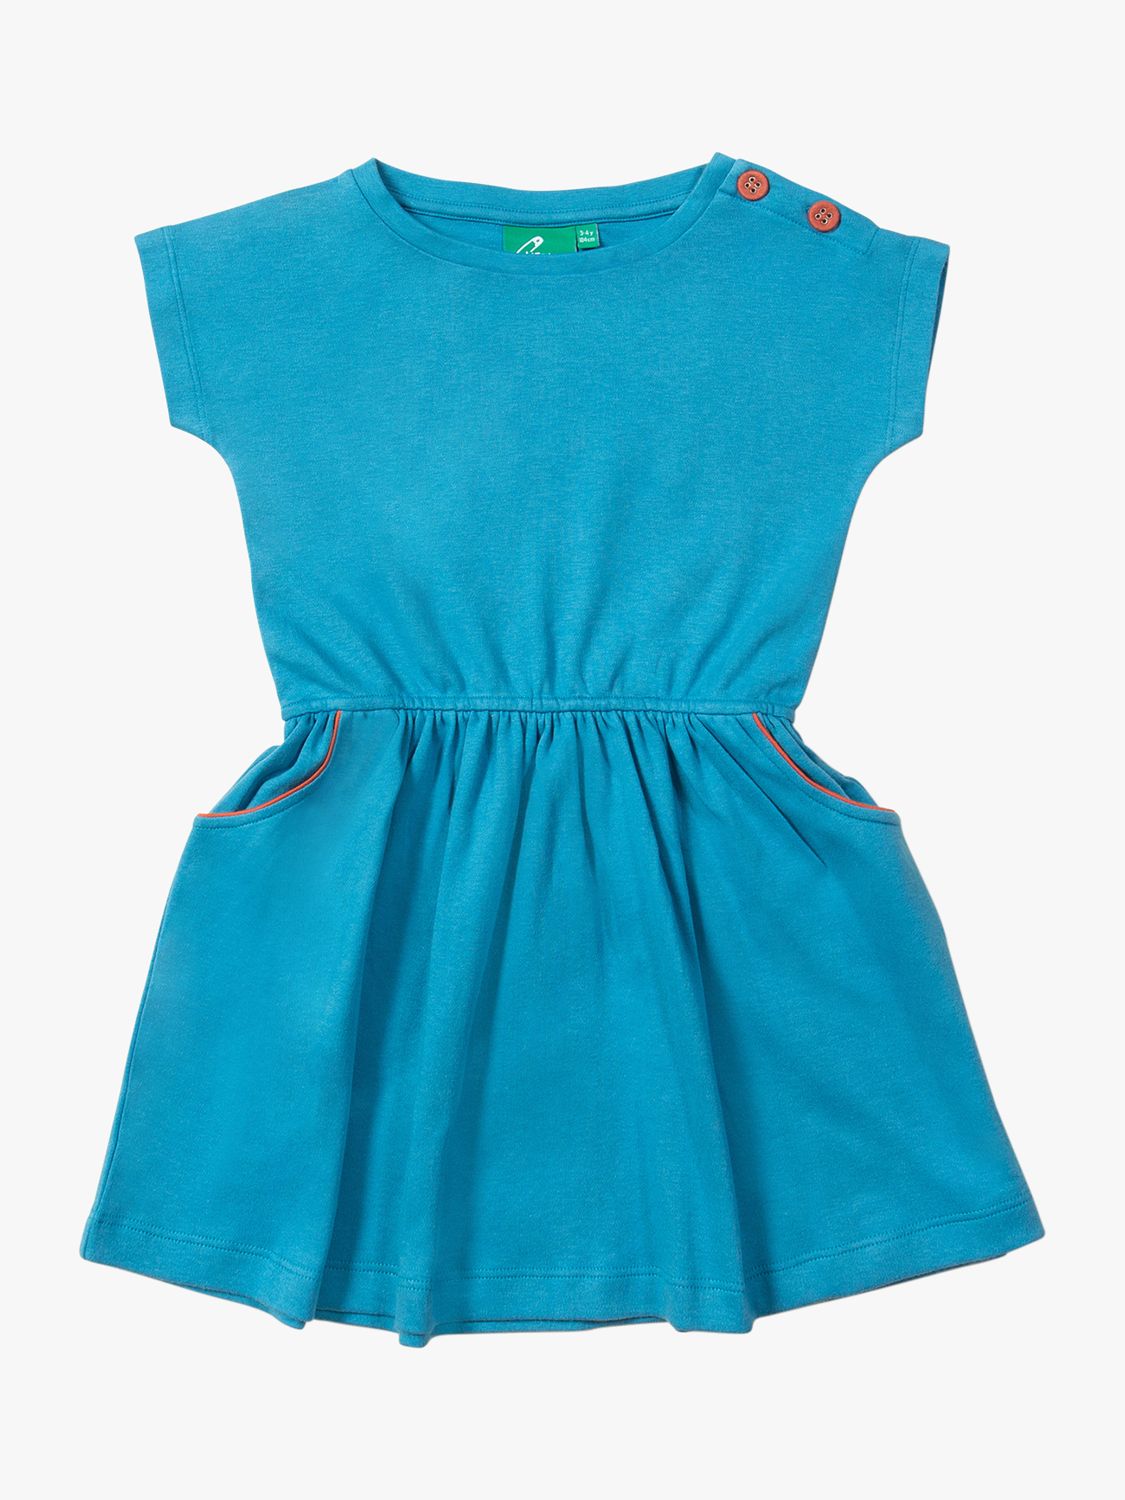 Little Green Radicals Baby Boat Neck Dress, Blue, 2-3 years